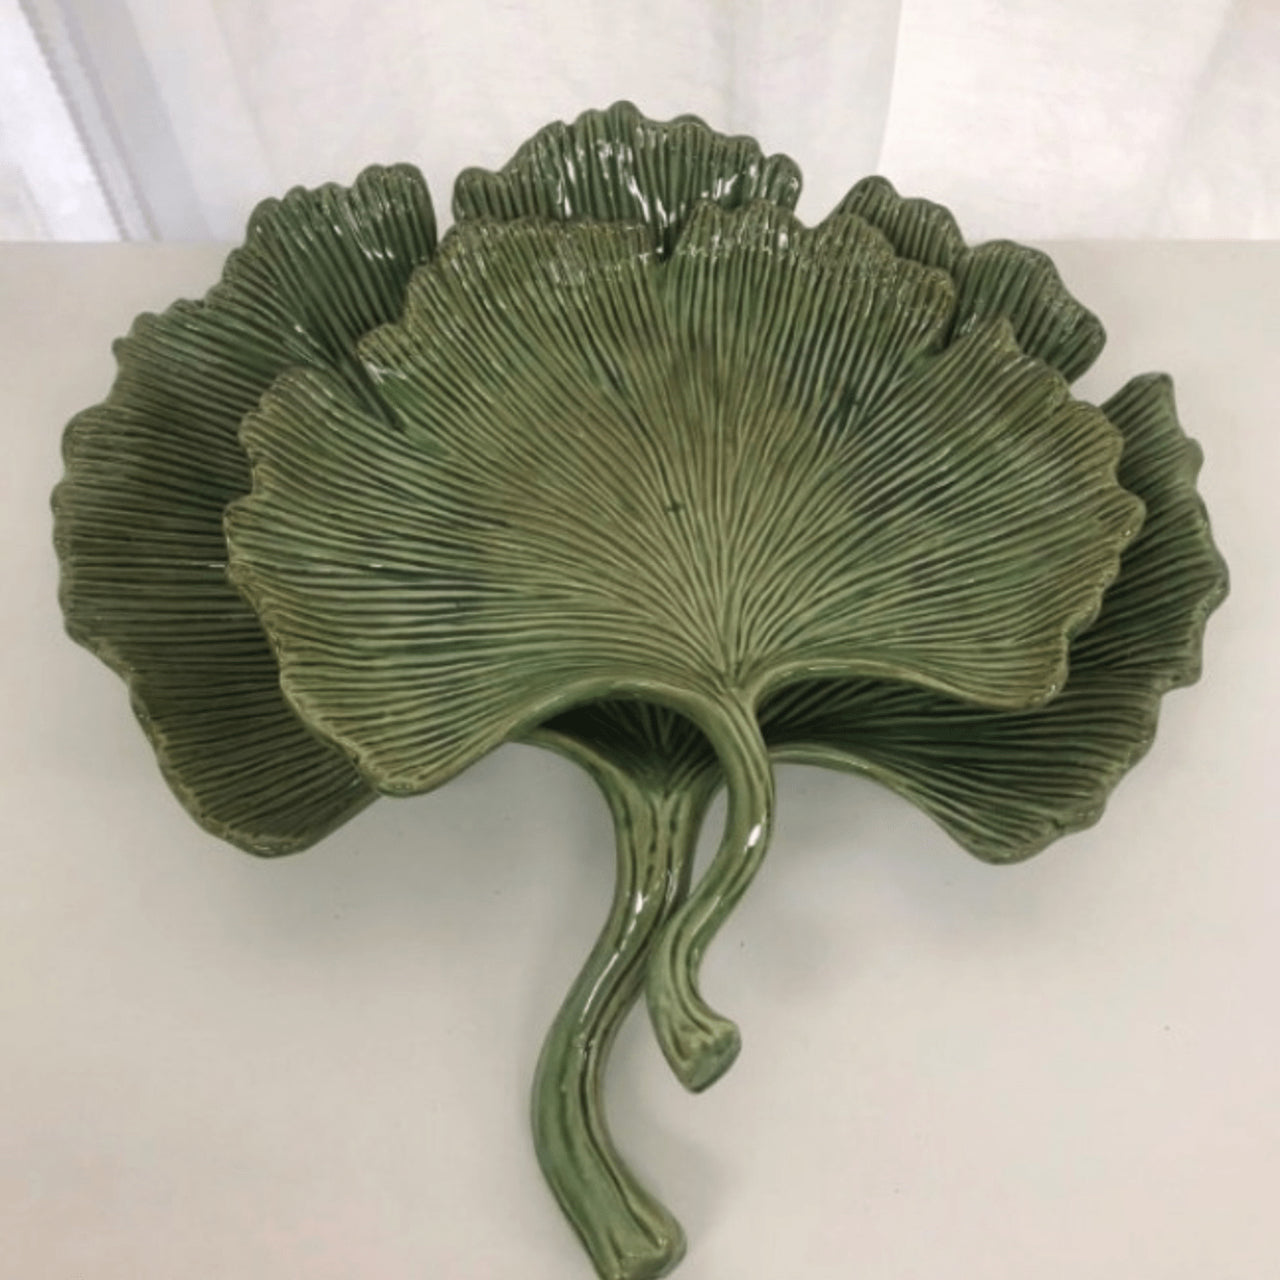 Ginkgo Leaf Plate - Large House of Dudley